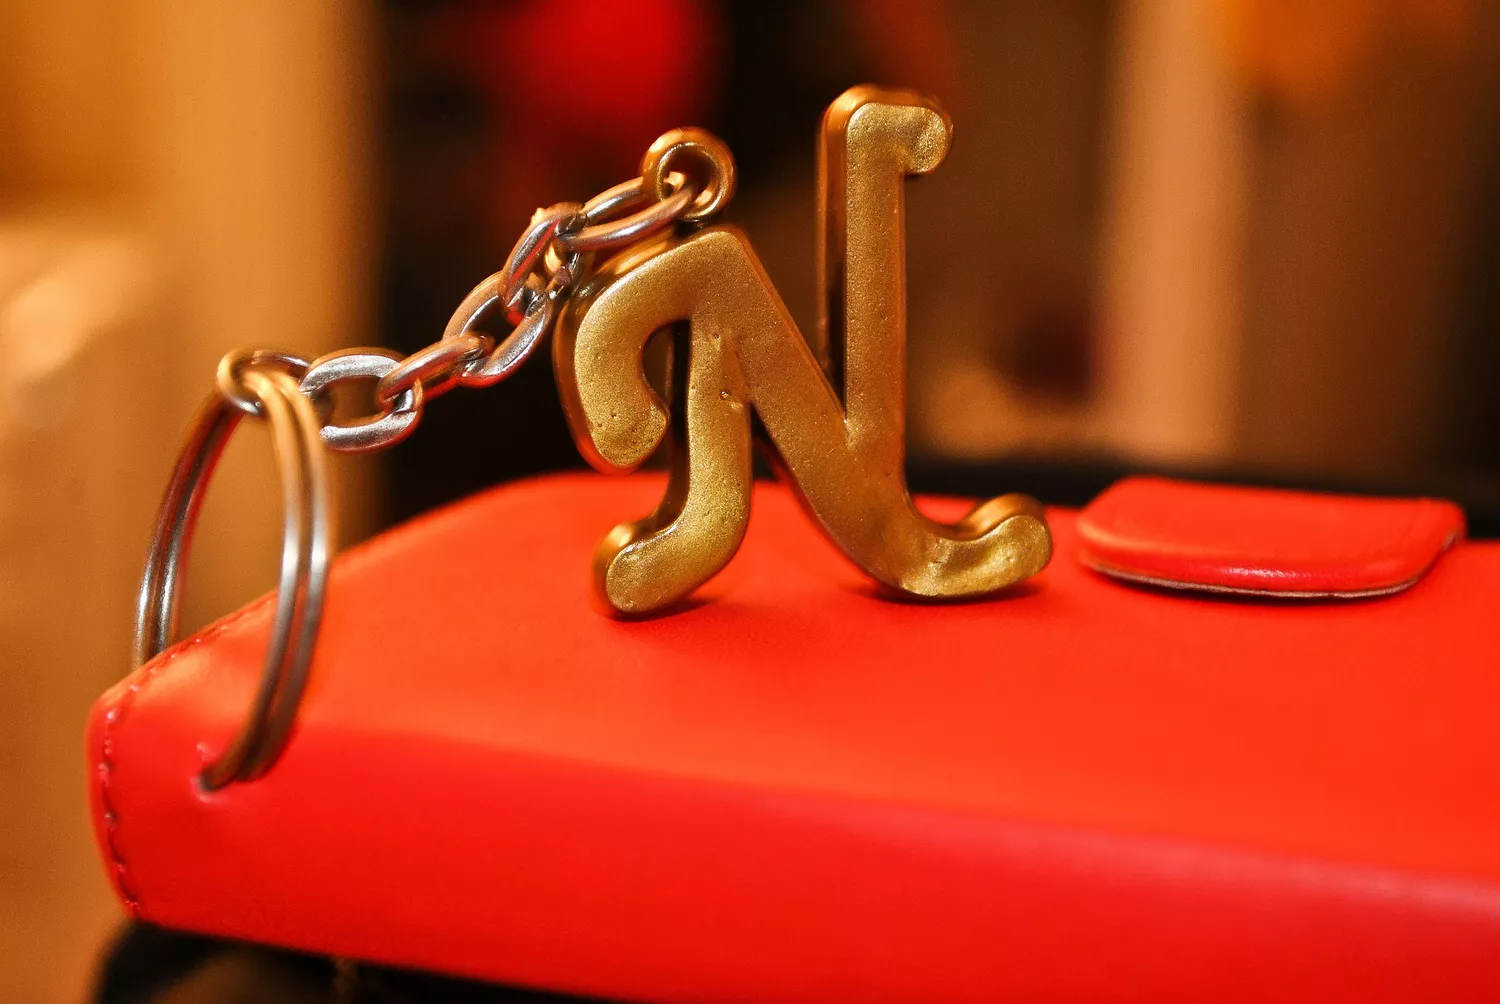 Capital "N" key ring attached to a red book close up.